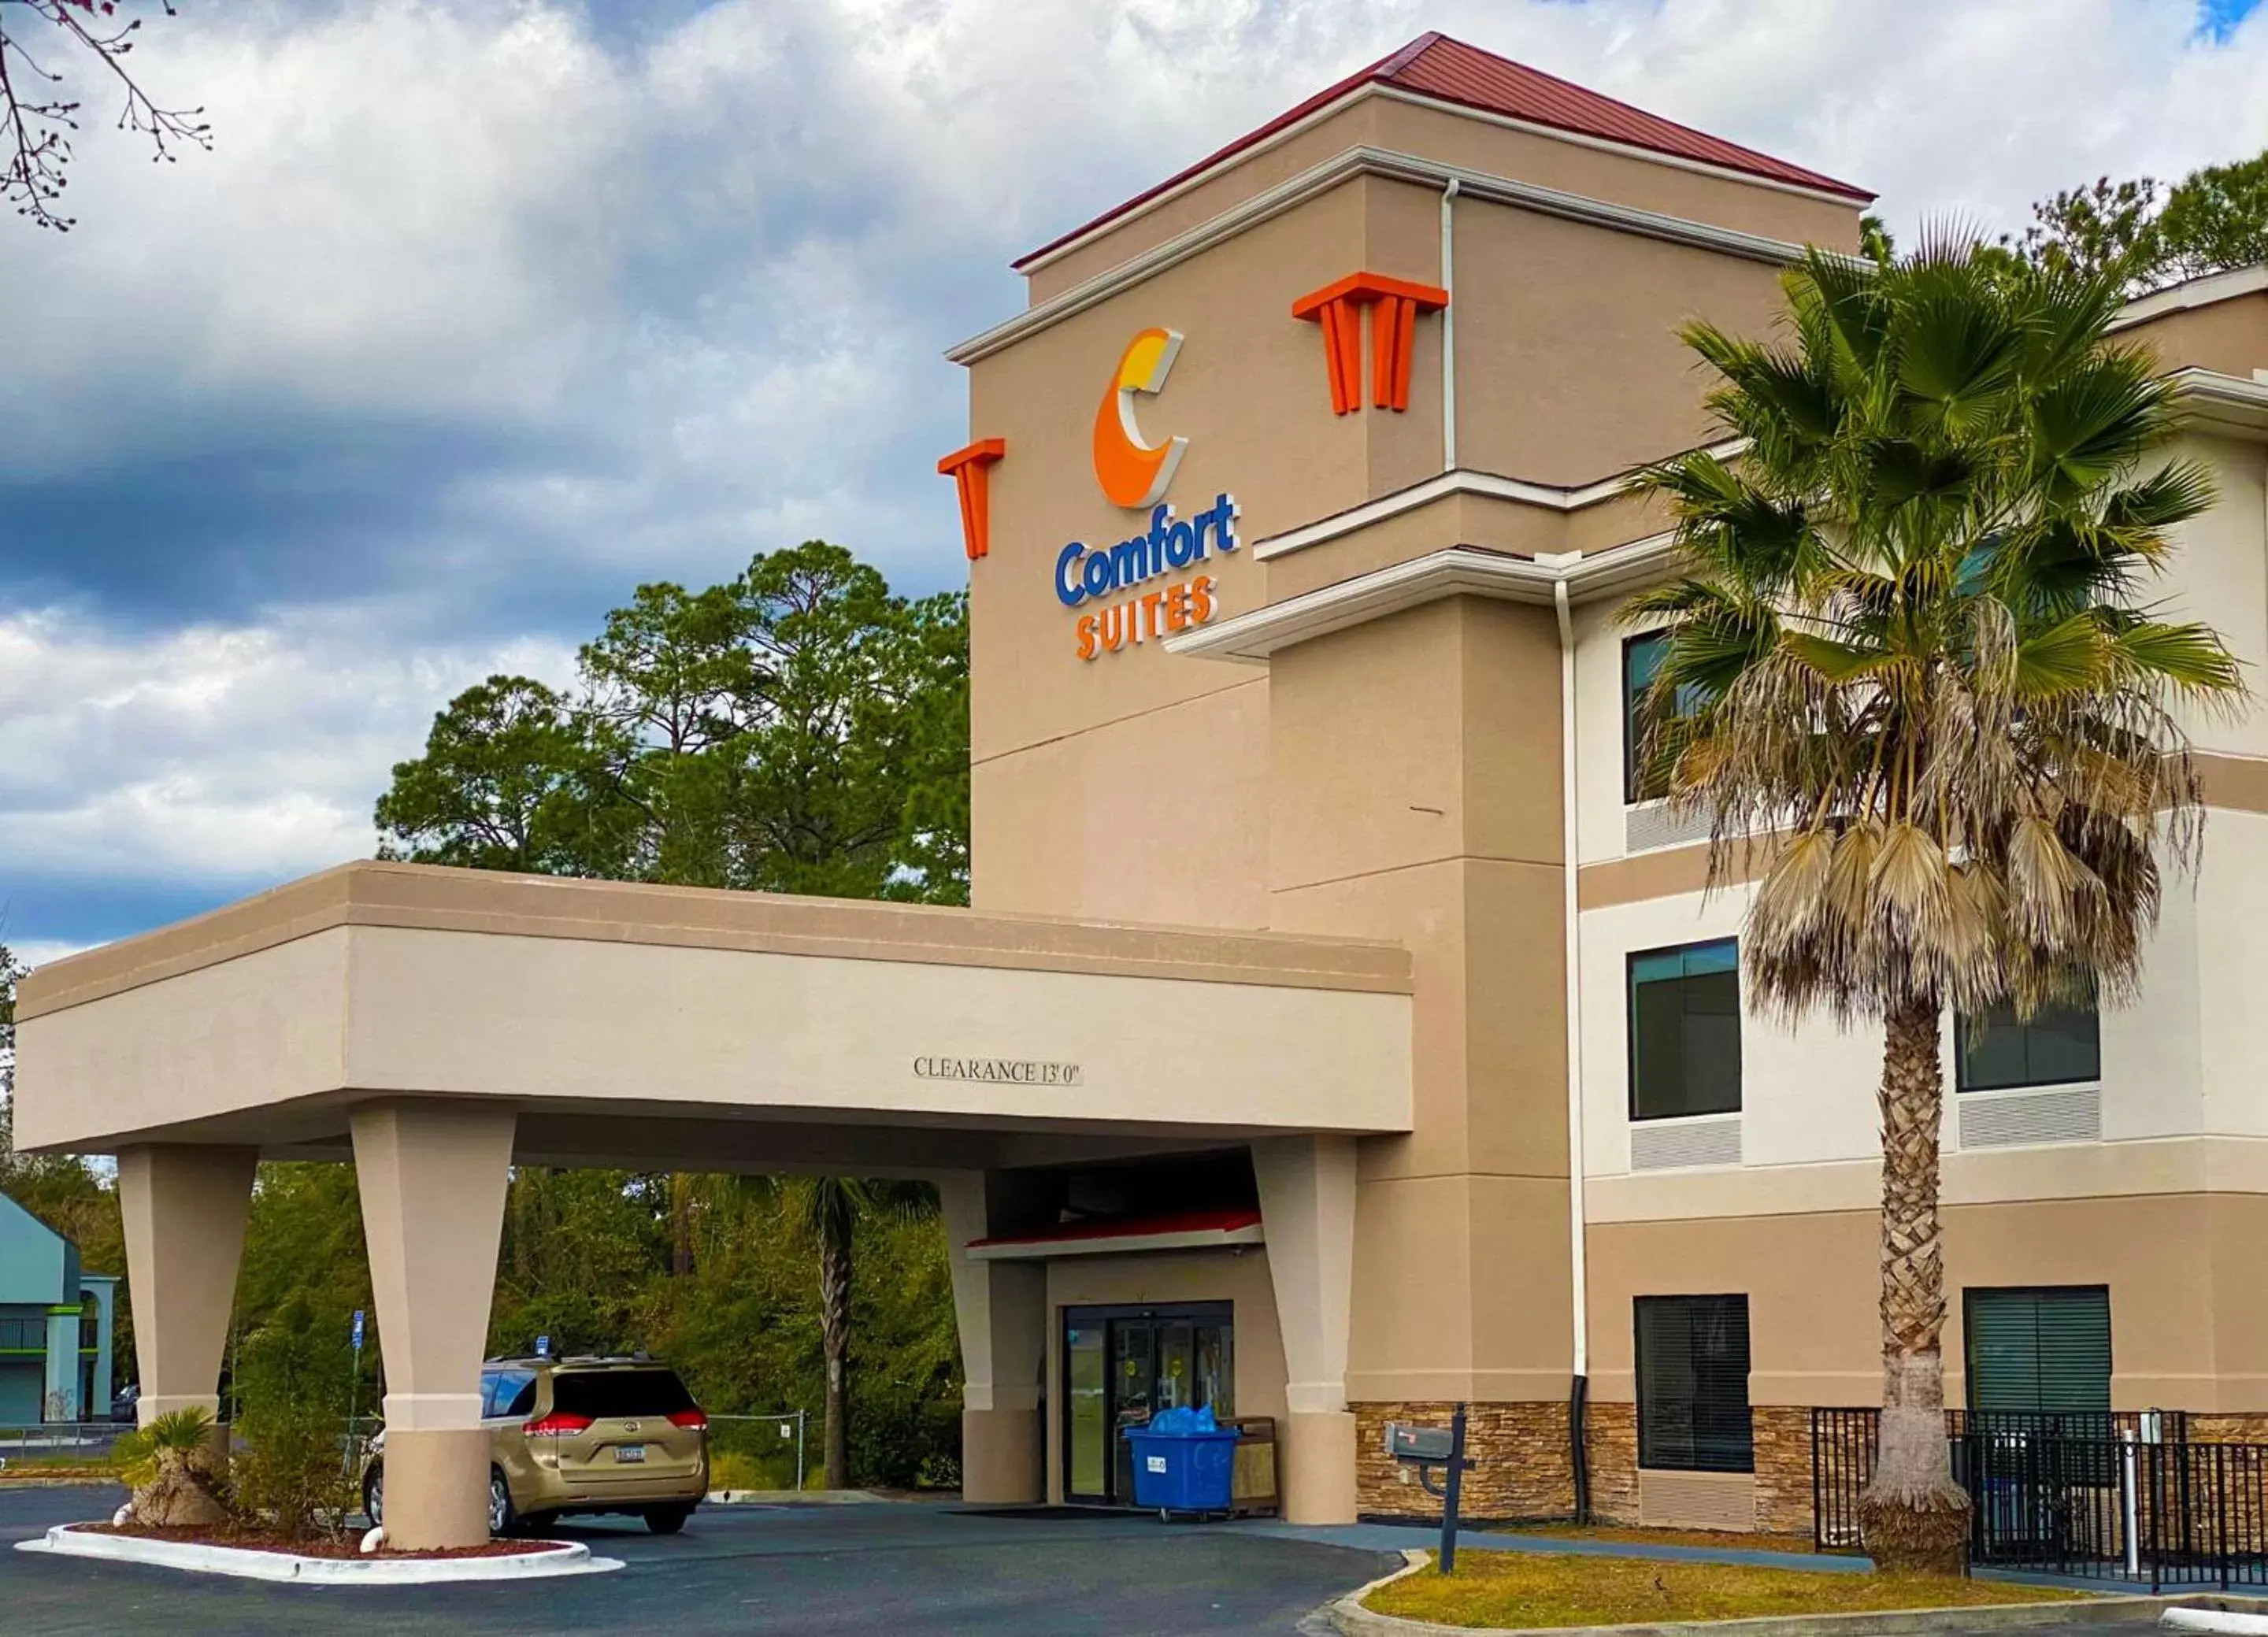 Property building in Comfort Suites by Choice Hotels, Kingsland, I-95, Kings Bay Naval Base